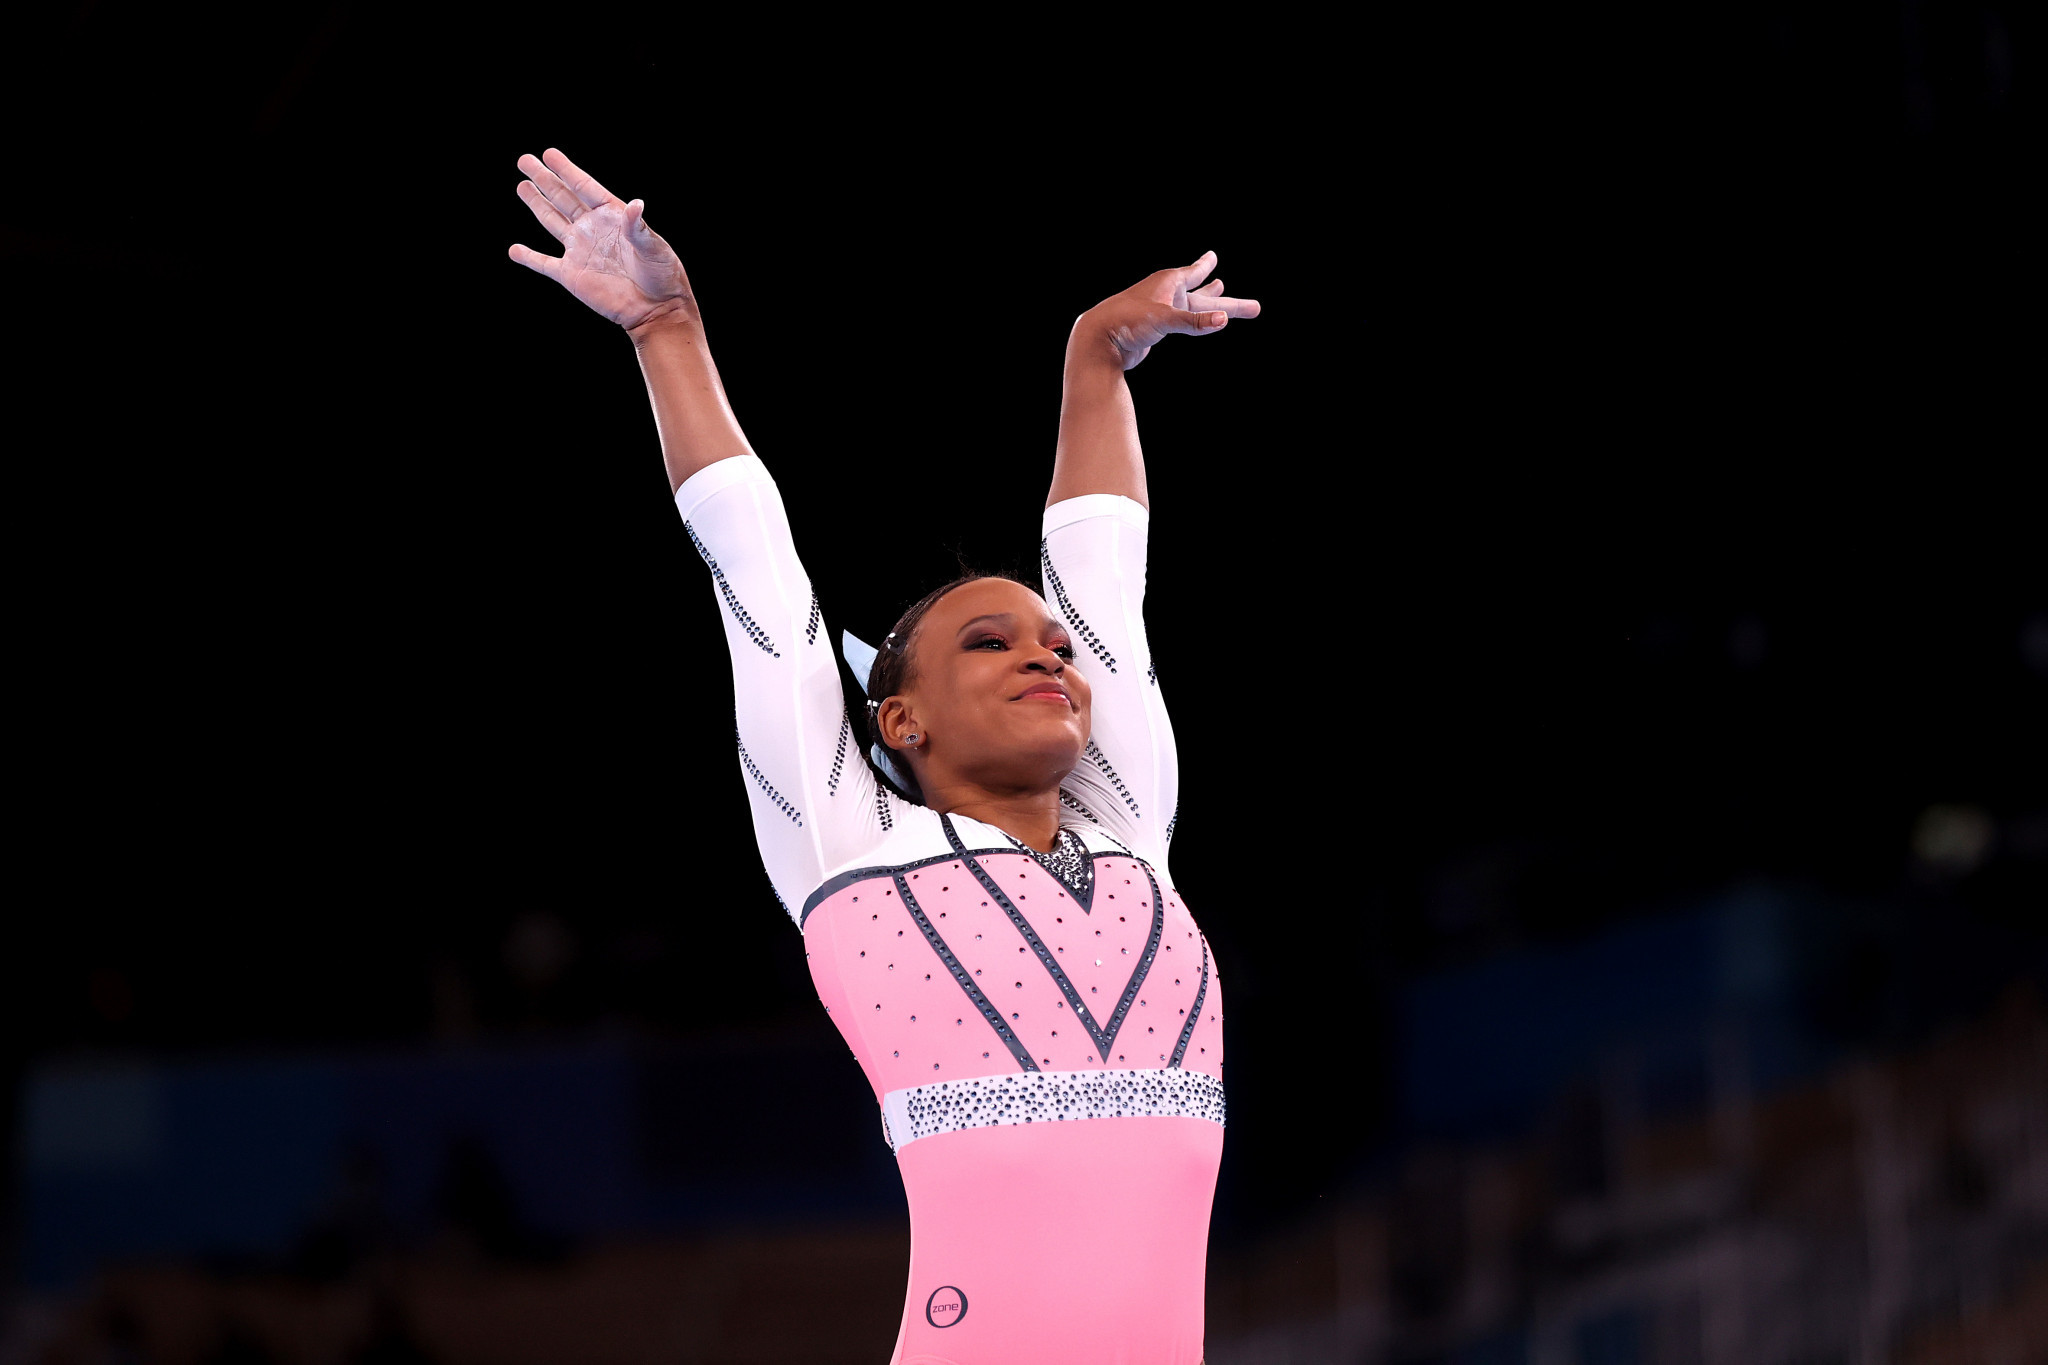 Rebeca Andrade is Brazil's second-ever Olympic gymnastics champion ©Getty Images